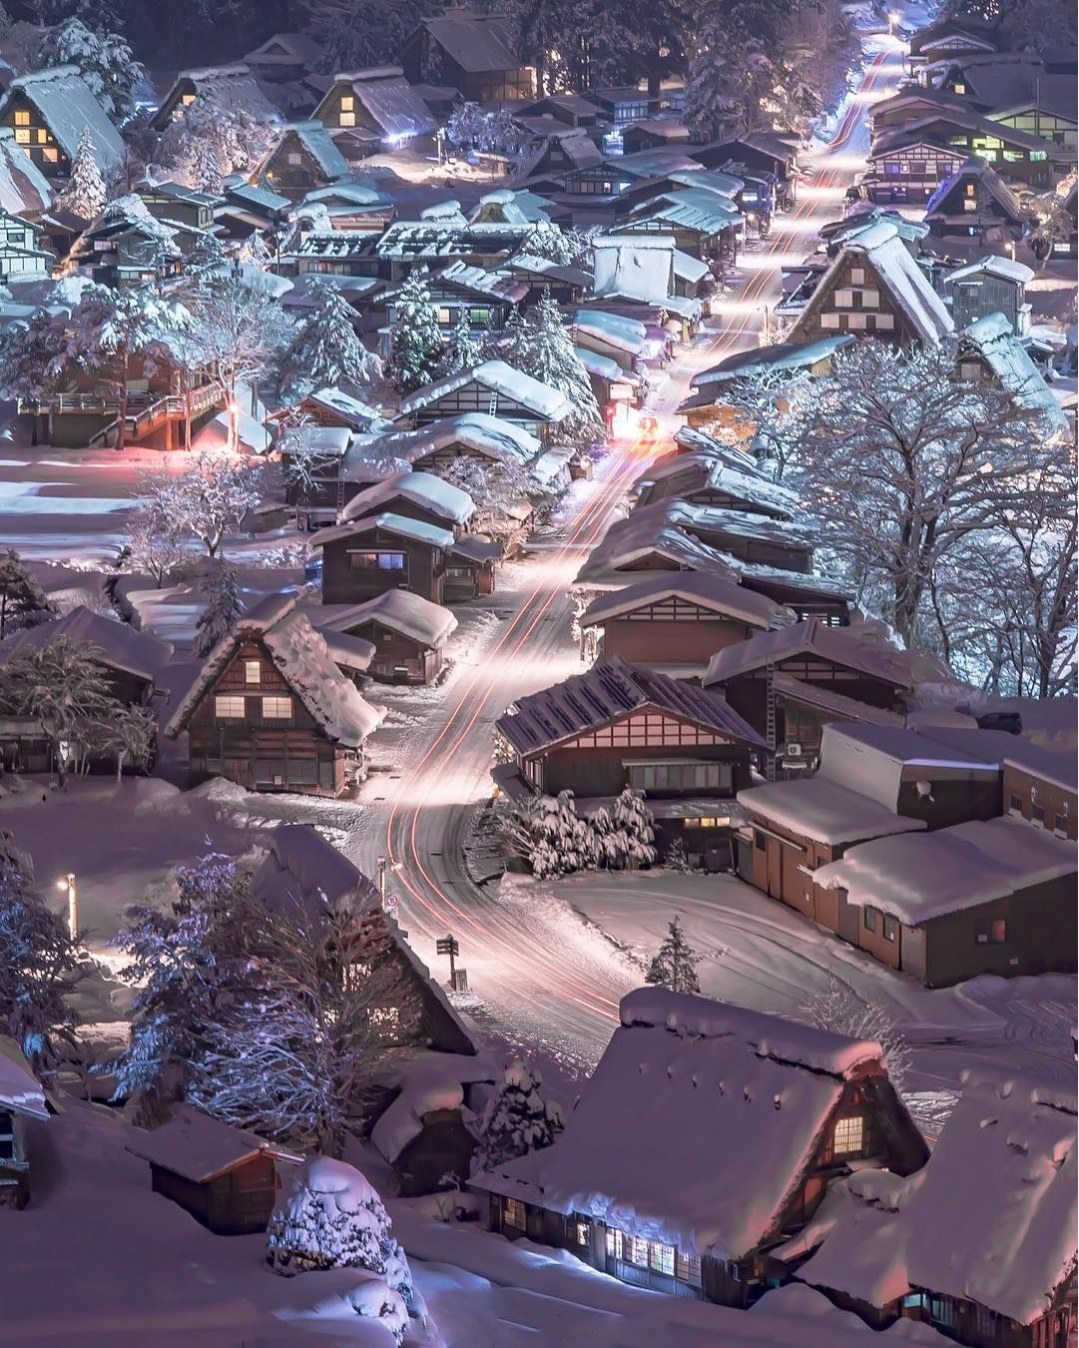 Cities in Japan to see snow - open-air museum in Shirakawa-go